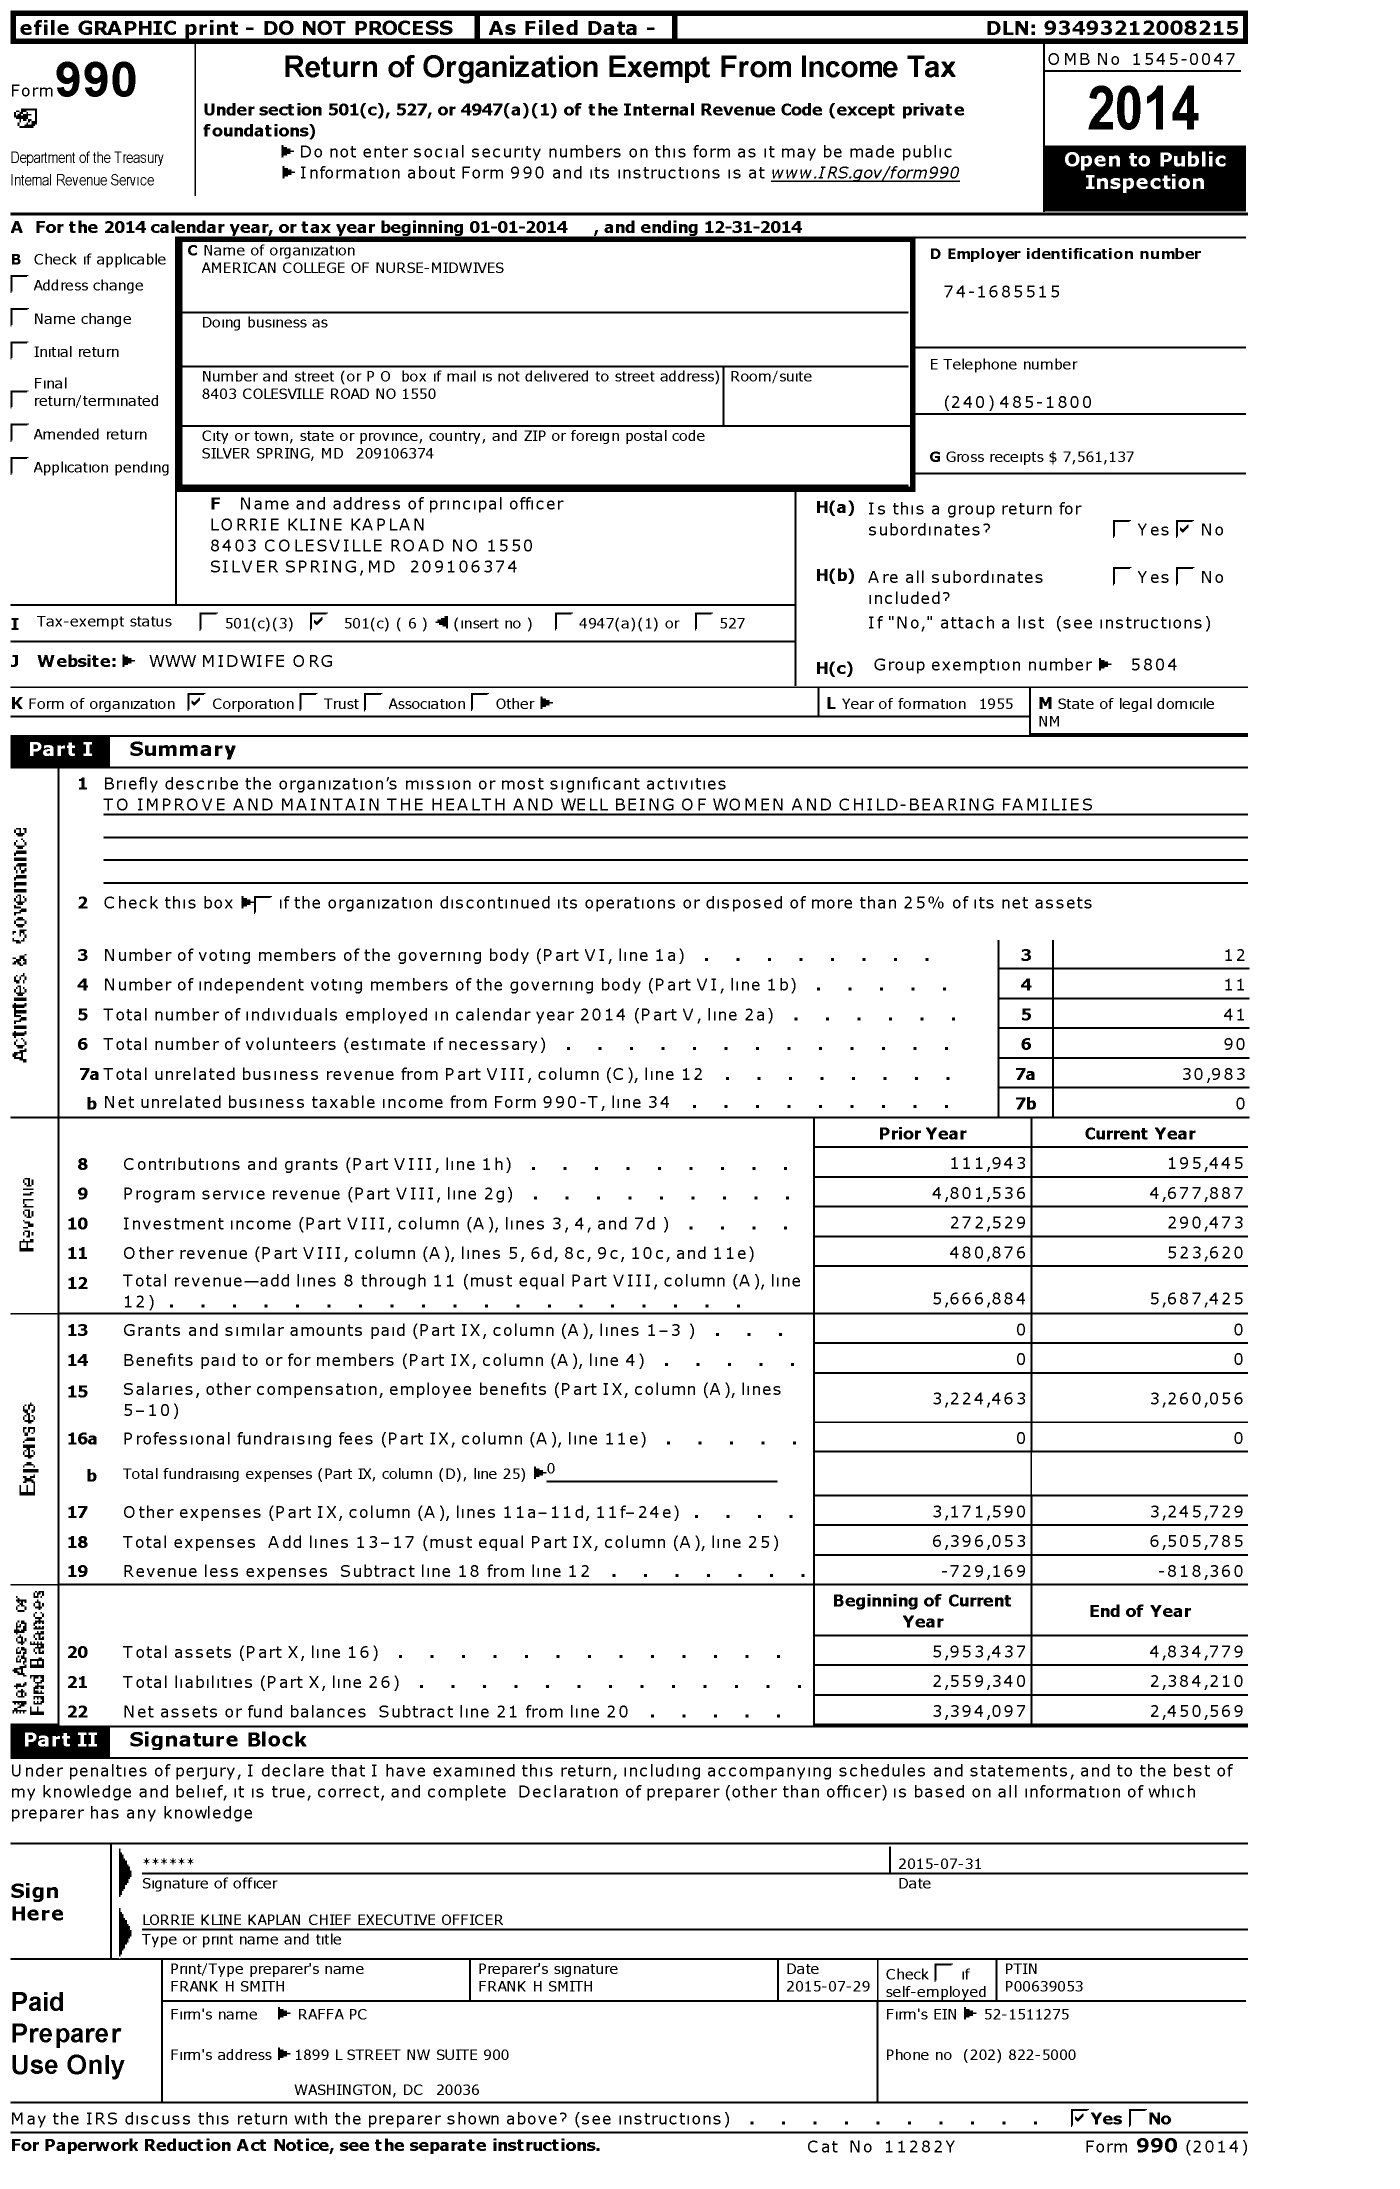 Image of first page of 2014 Form 990O for American College of Nurse-Midwives (ACNM)